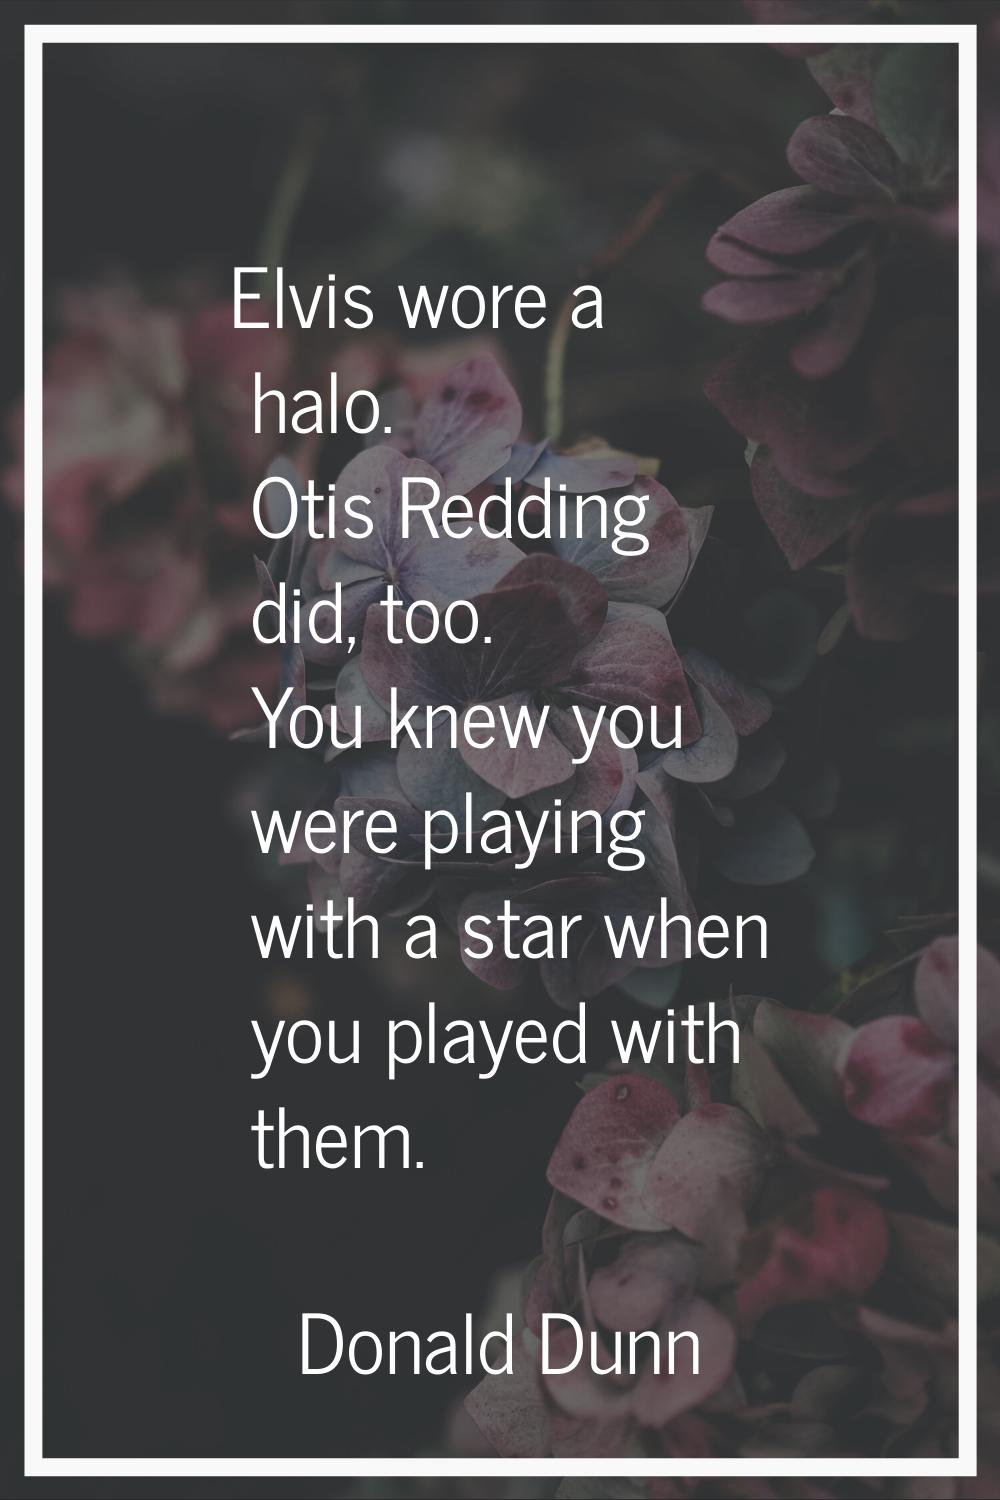 Elvis wore a halo. Otis Redding did, too. You knew you were playing with a star when you played wit